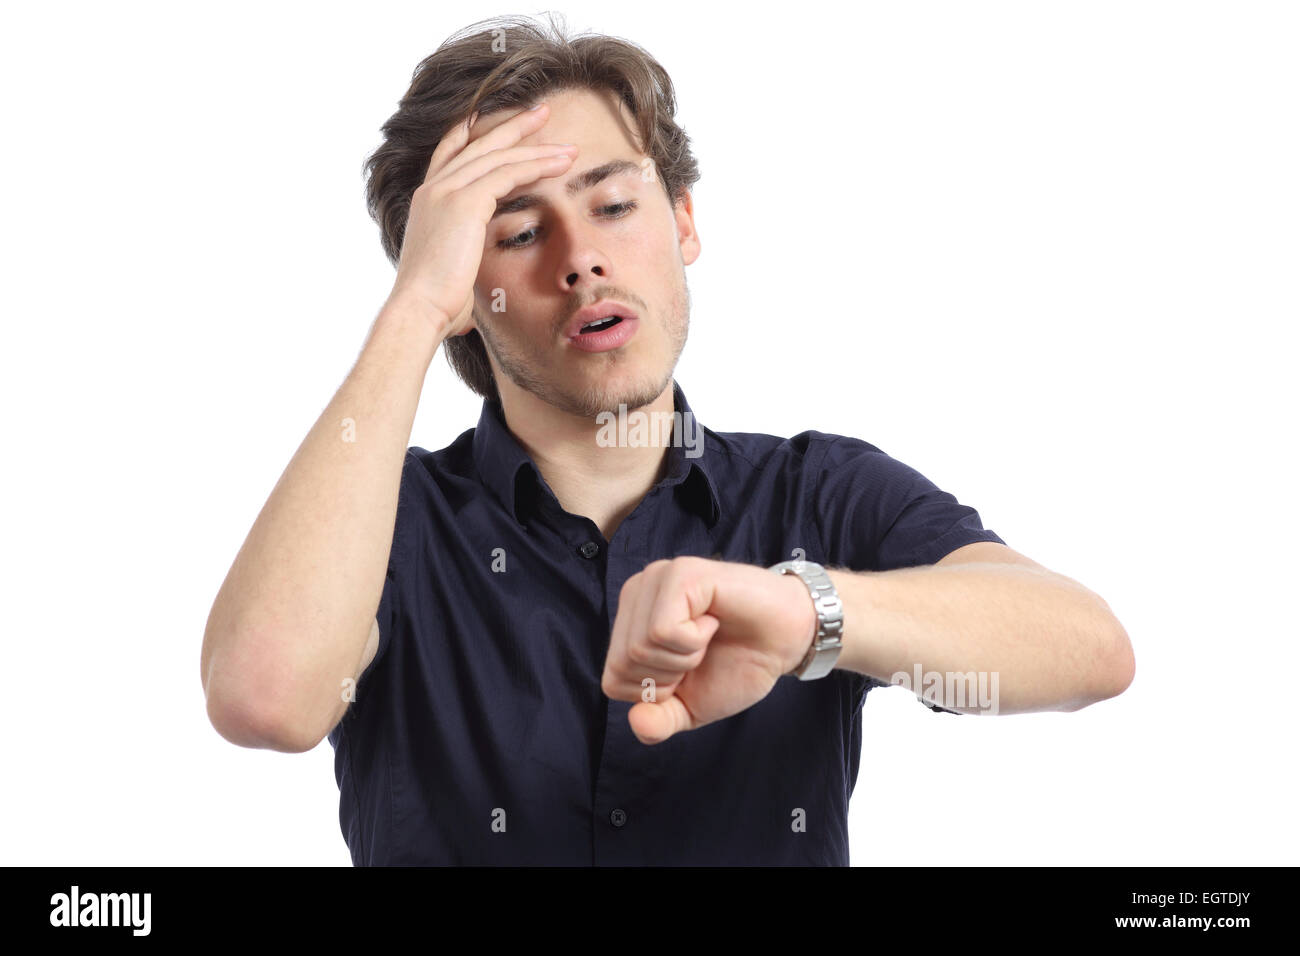 Worried man running out of time on a white background Stock Photo